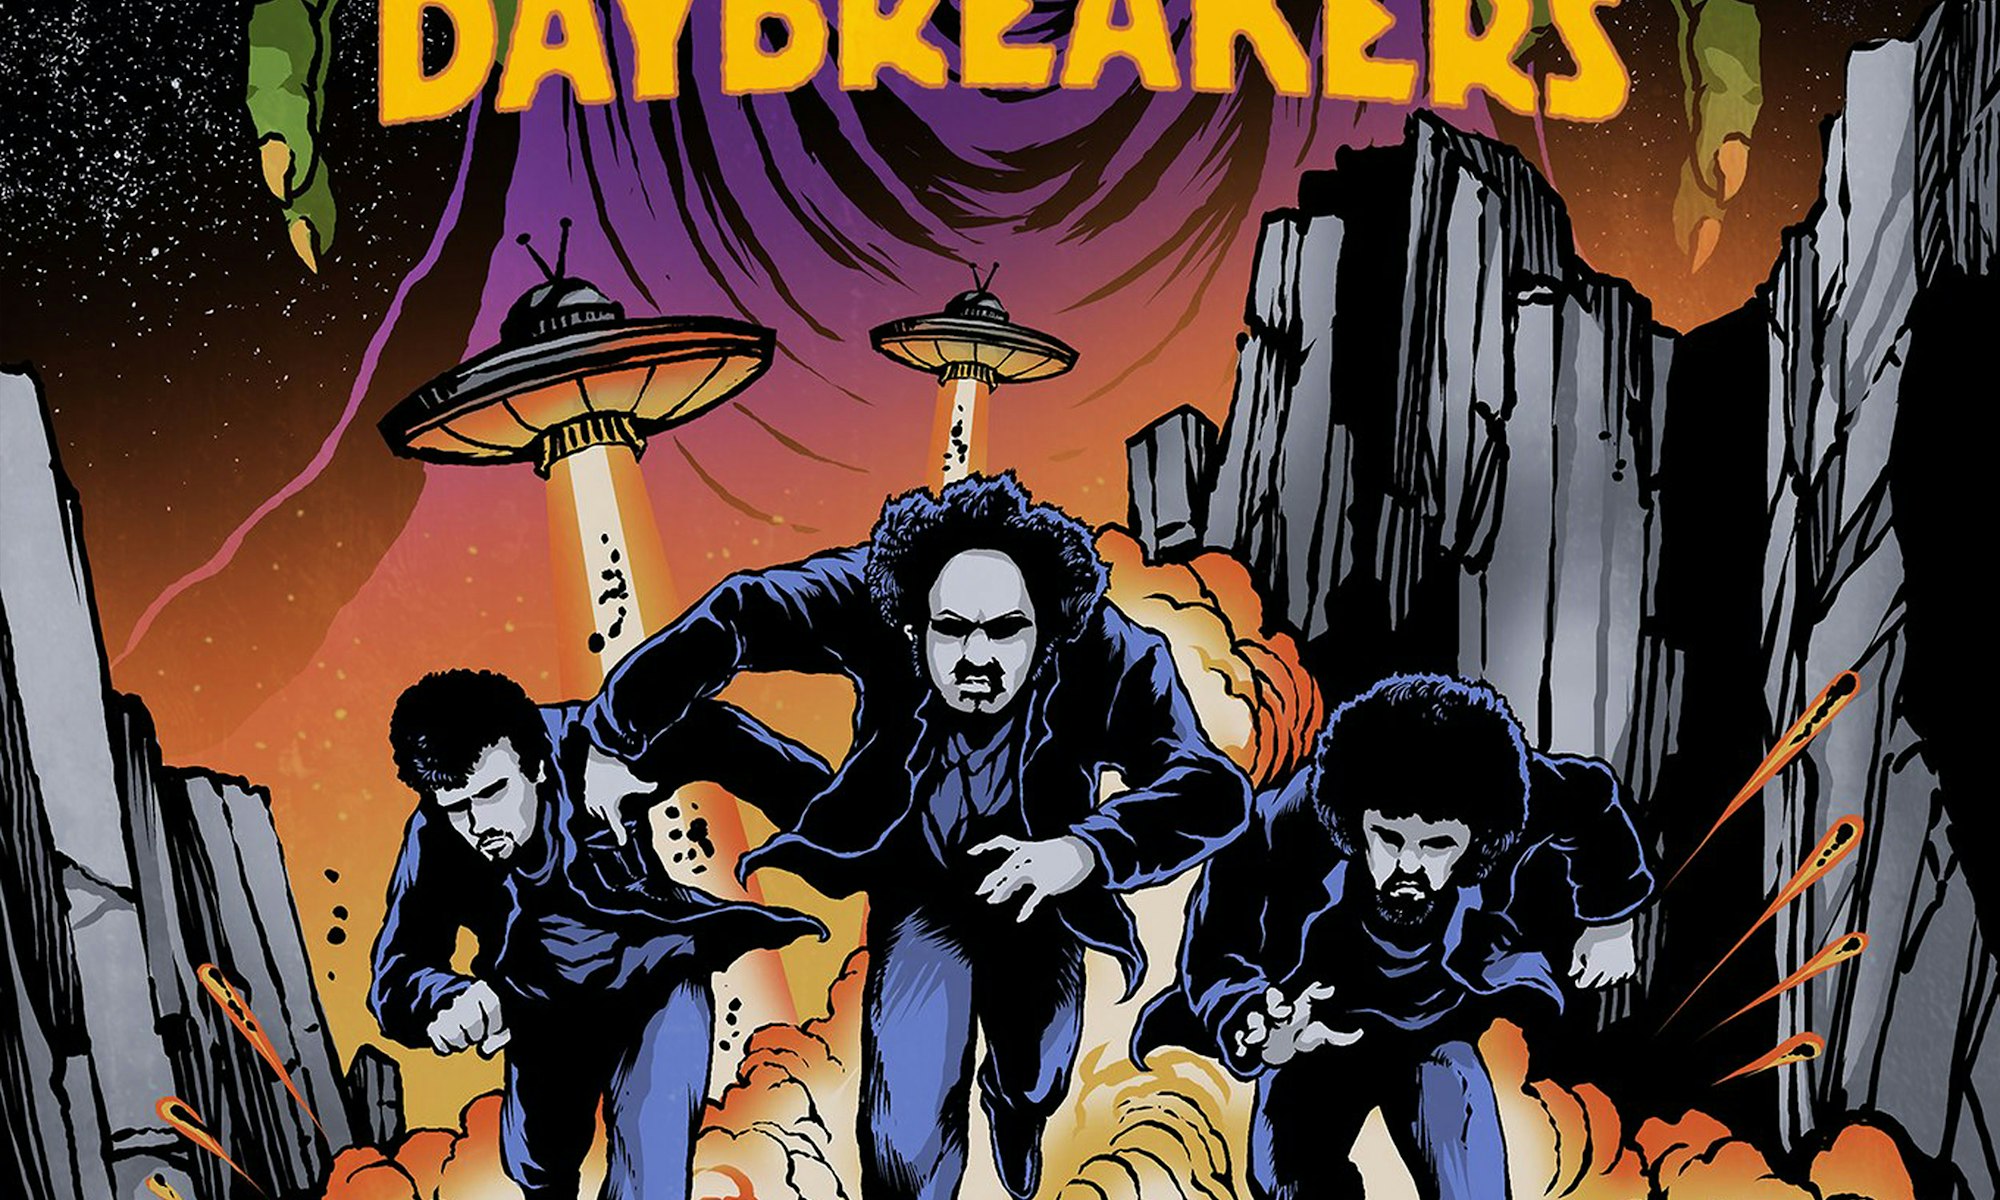 THE DAYBREAKERS – Free Entry at The World’s End